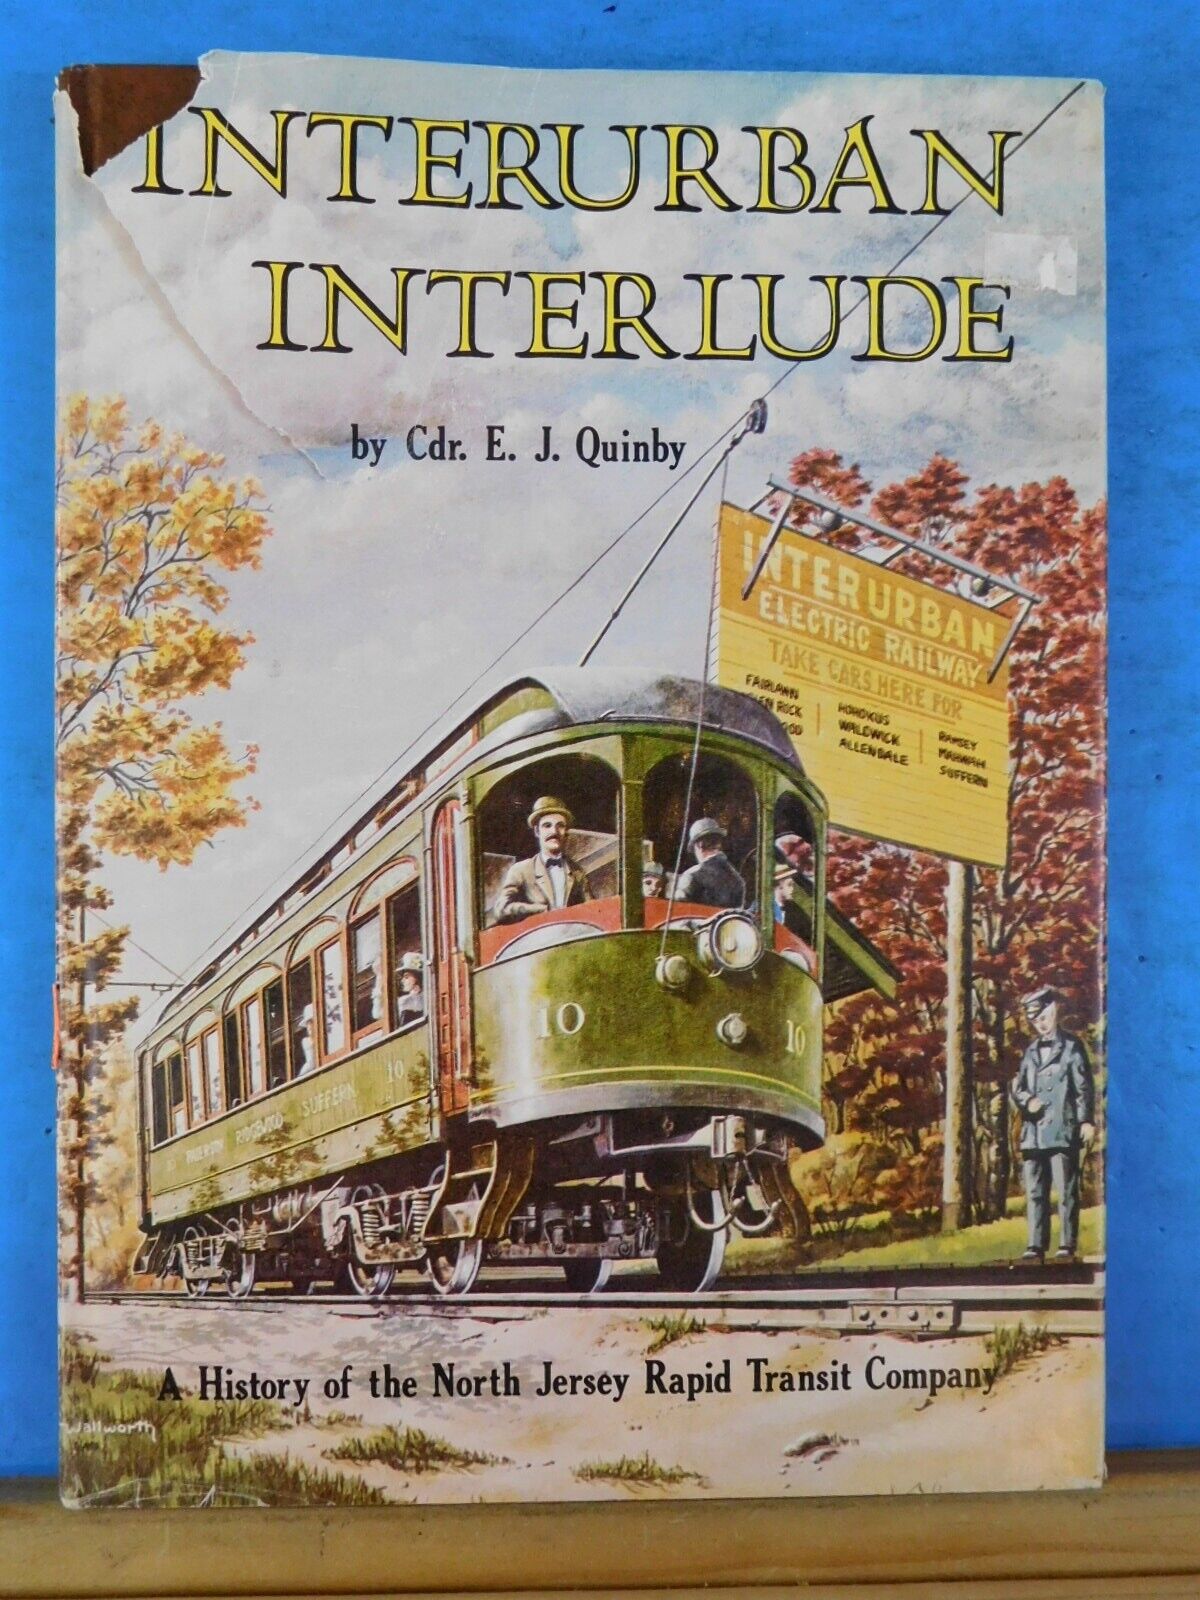 Interurban Interlude by Quinby A History of the North Jersey Rapid Transit w/ DJ